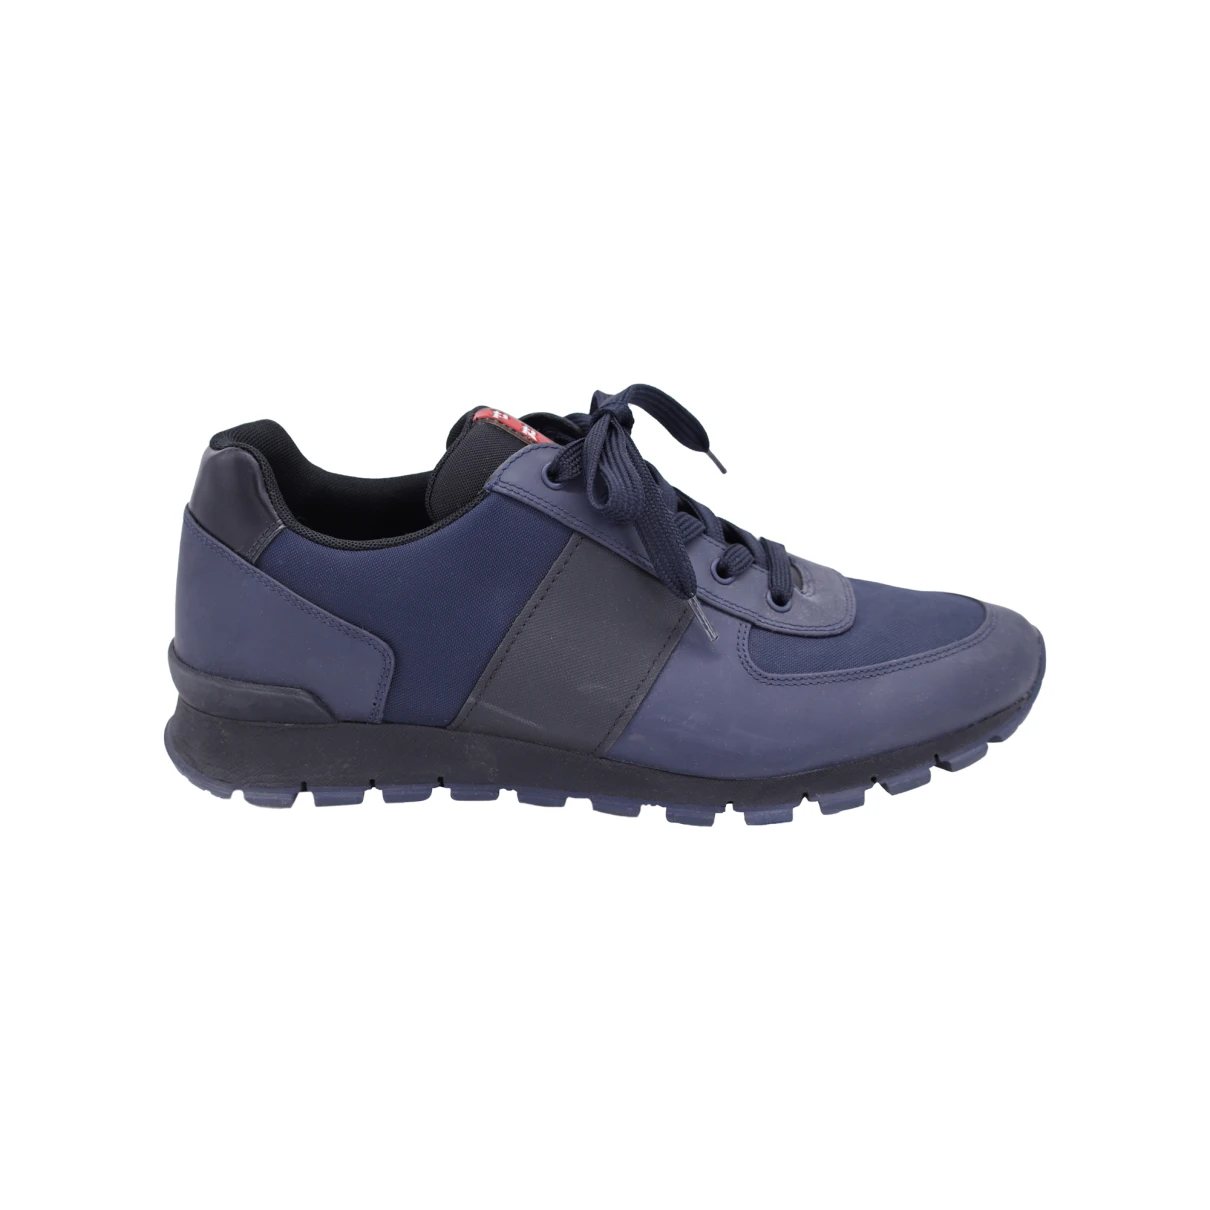 Pre-owned Prada Leather Low Trainers In Blue